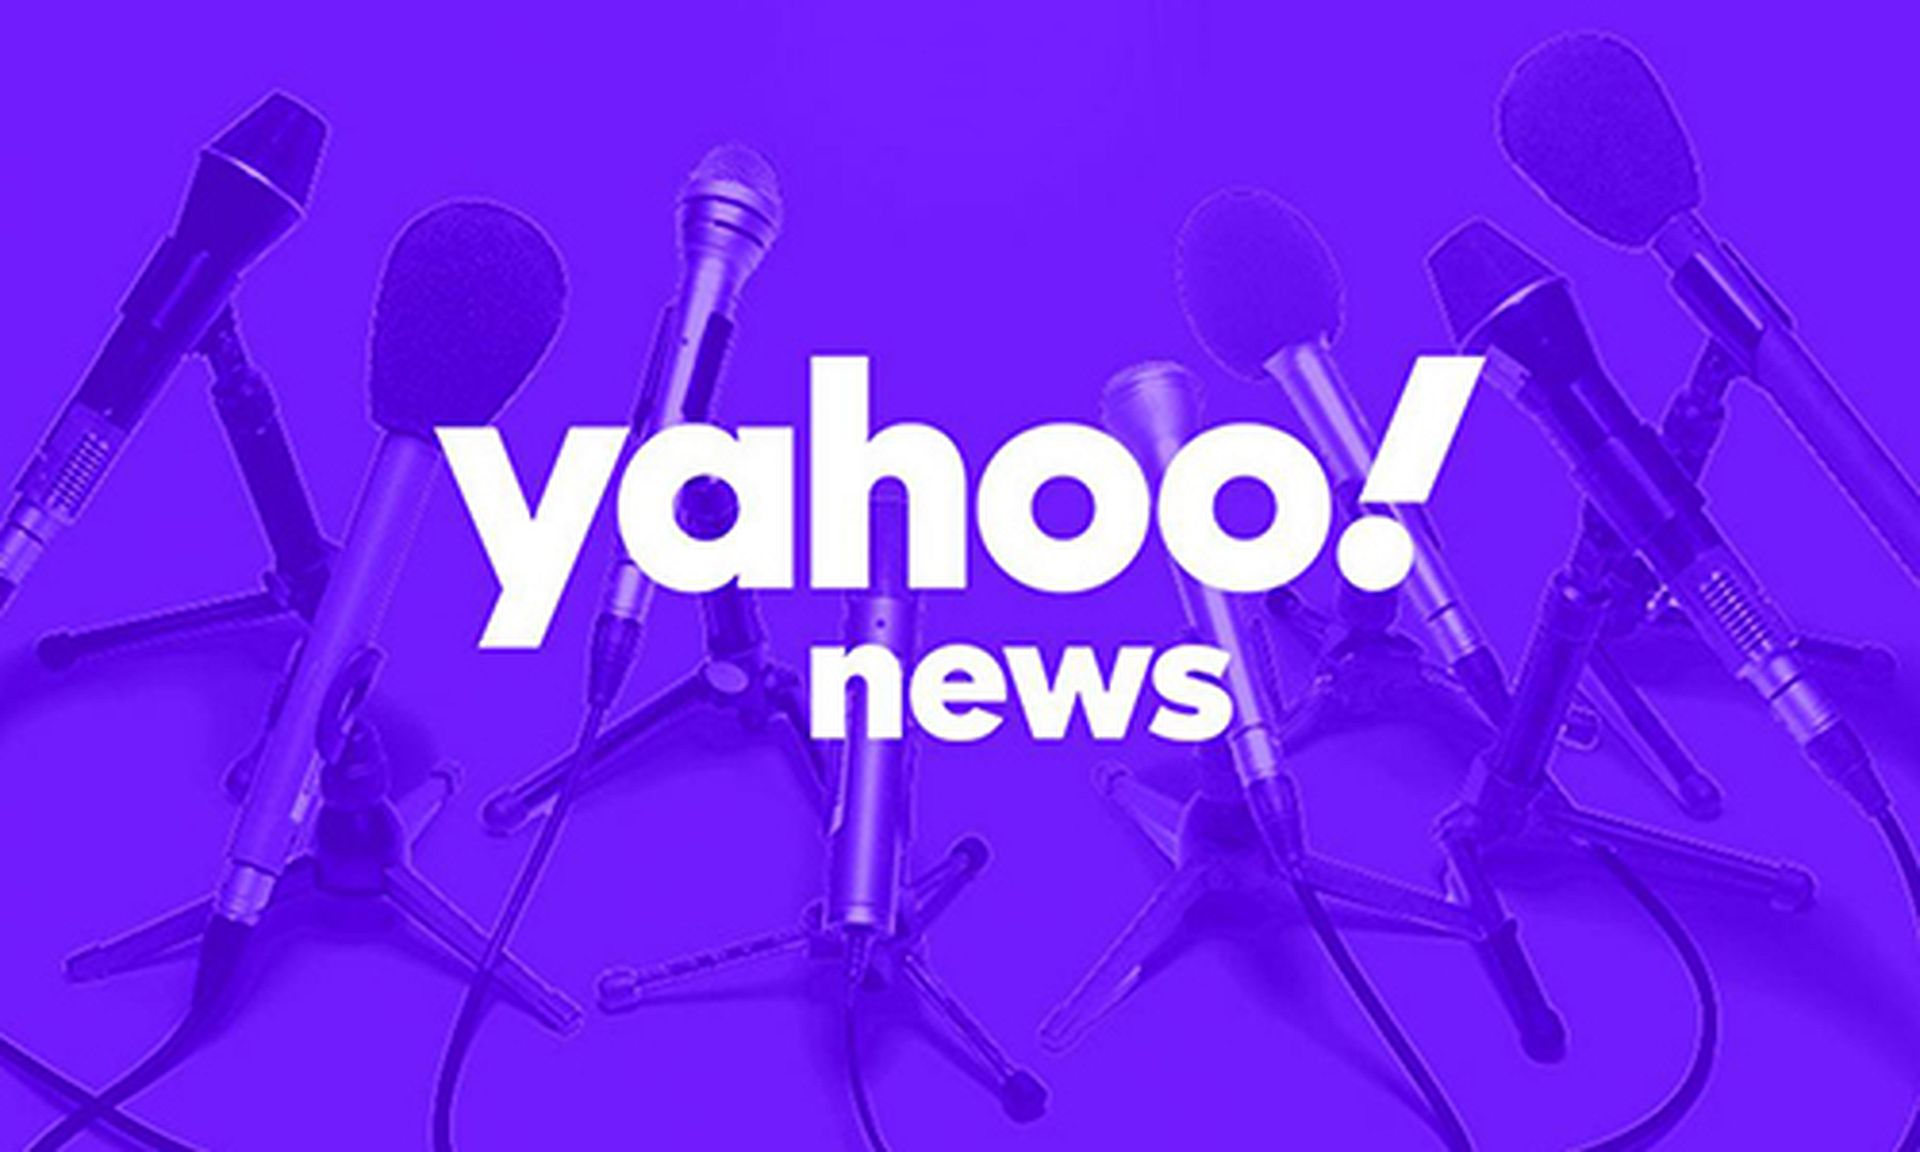 Yahoo's strategic leap into personalized news with Artifact